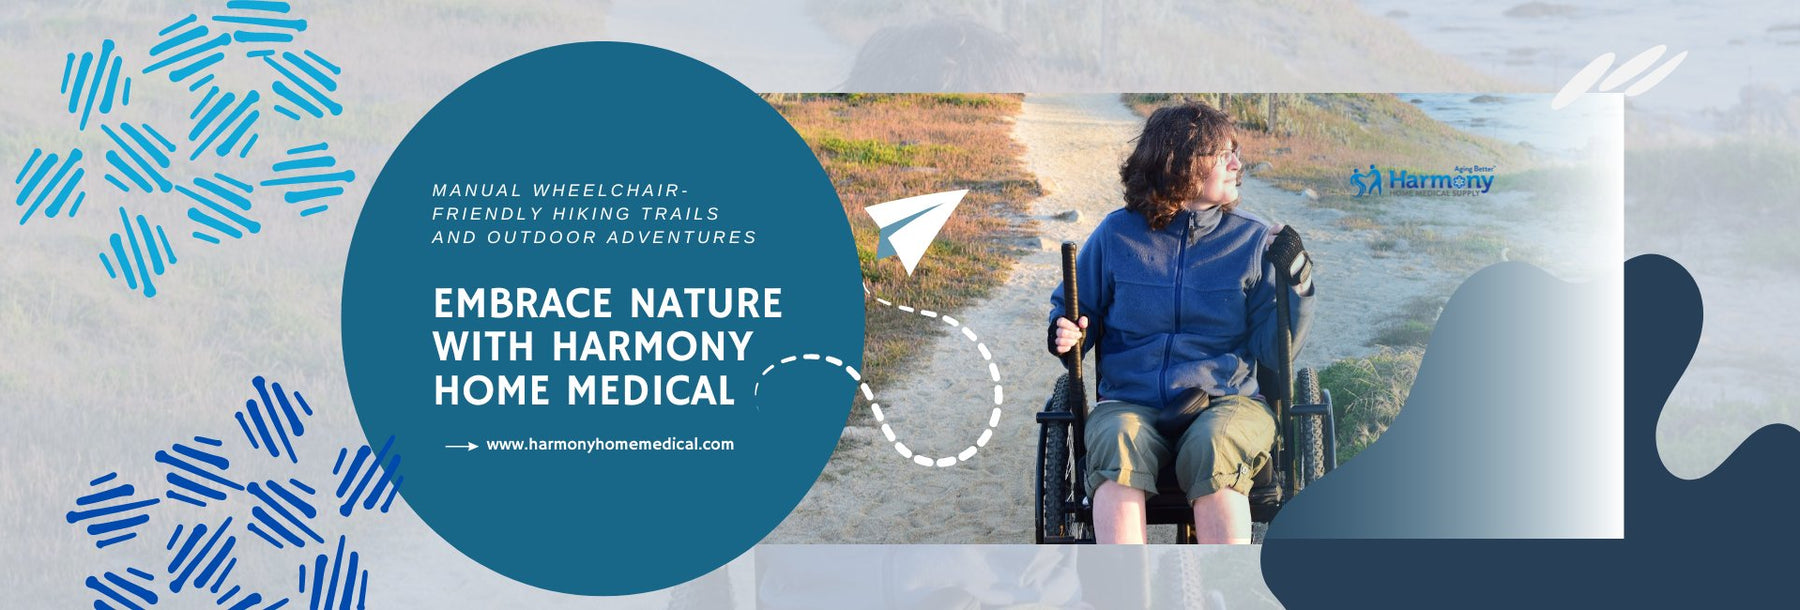 Manual Wheelchair-Friendly Hiking Trails and Outdoor Adventures: Embrace Nature with Harmony Home Medical - Harmony Home Medical Supply